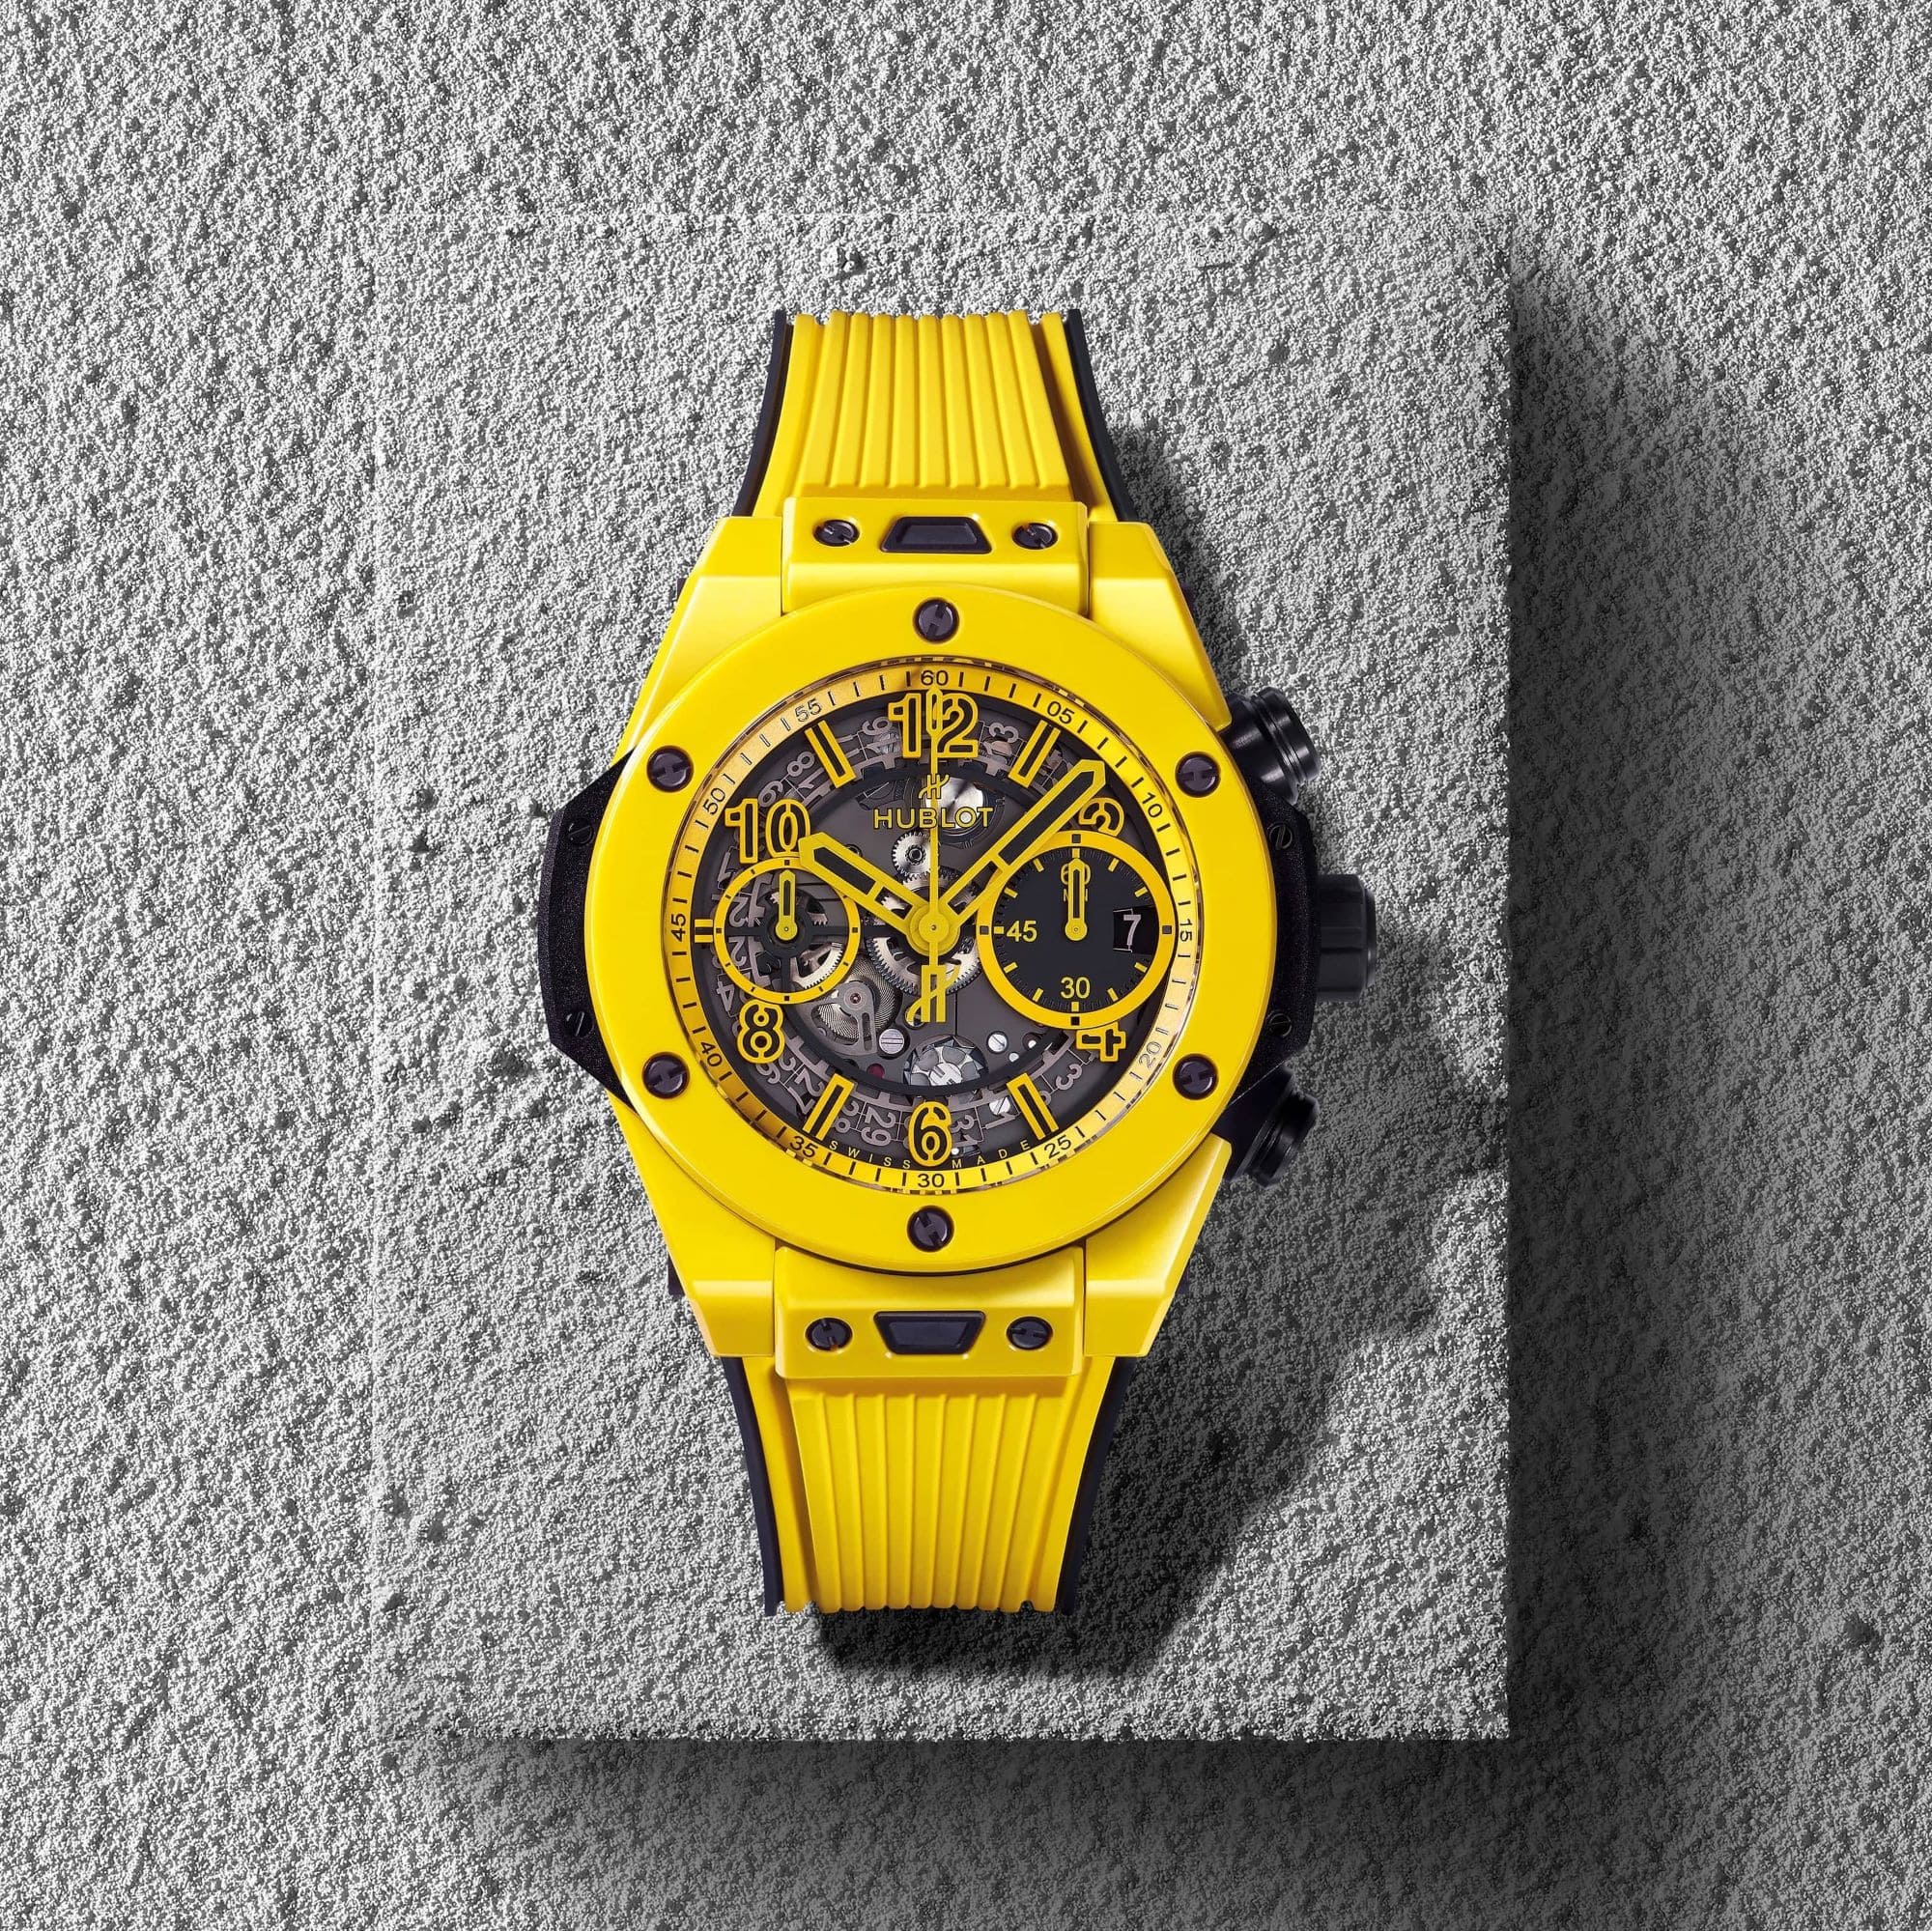 HUBLOT INVITES YOU TO ENJOY THE SUNNY SIDE OF LIFE!